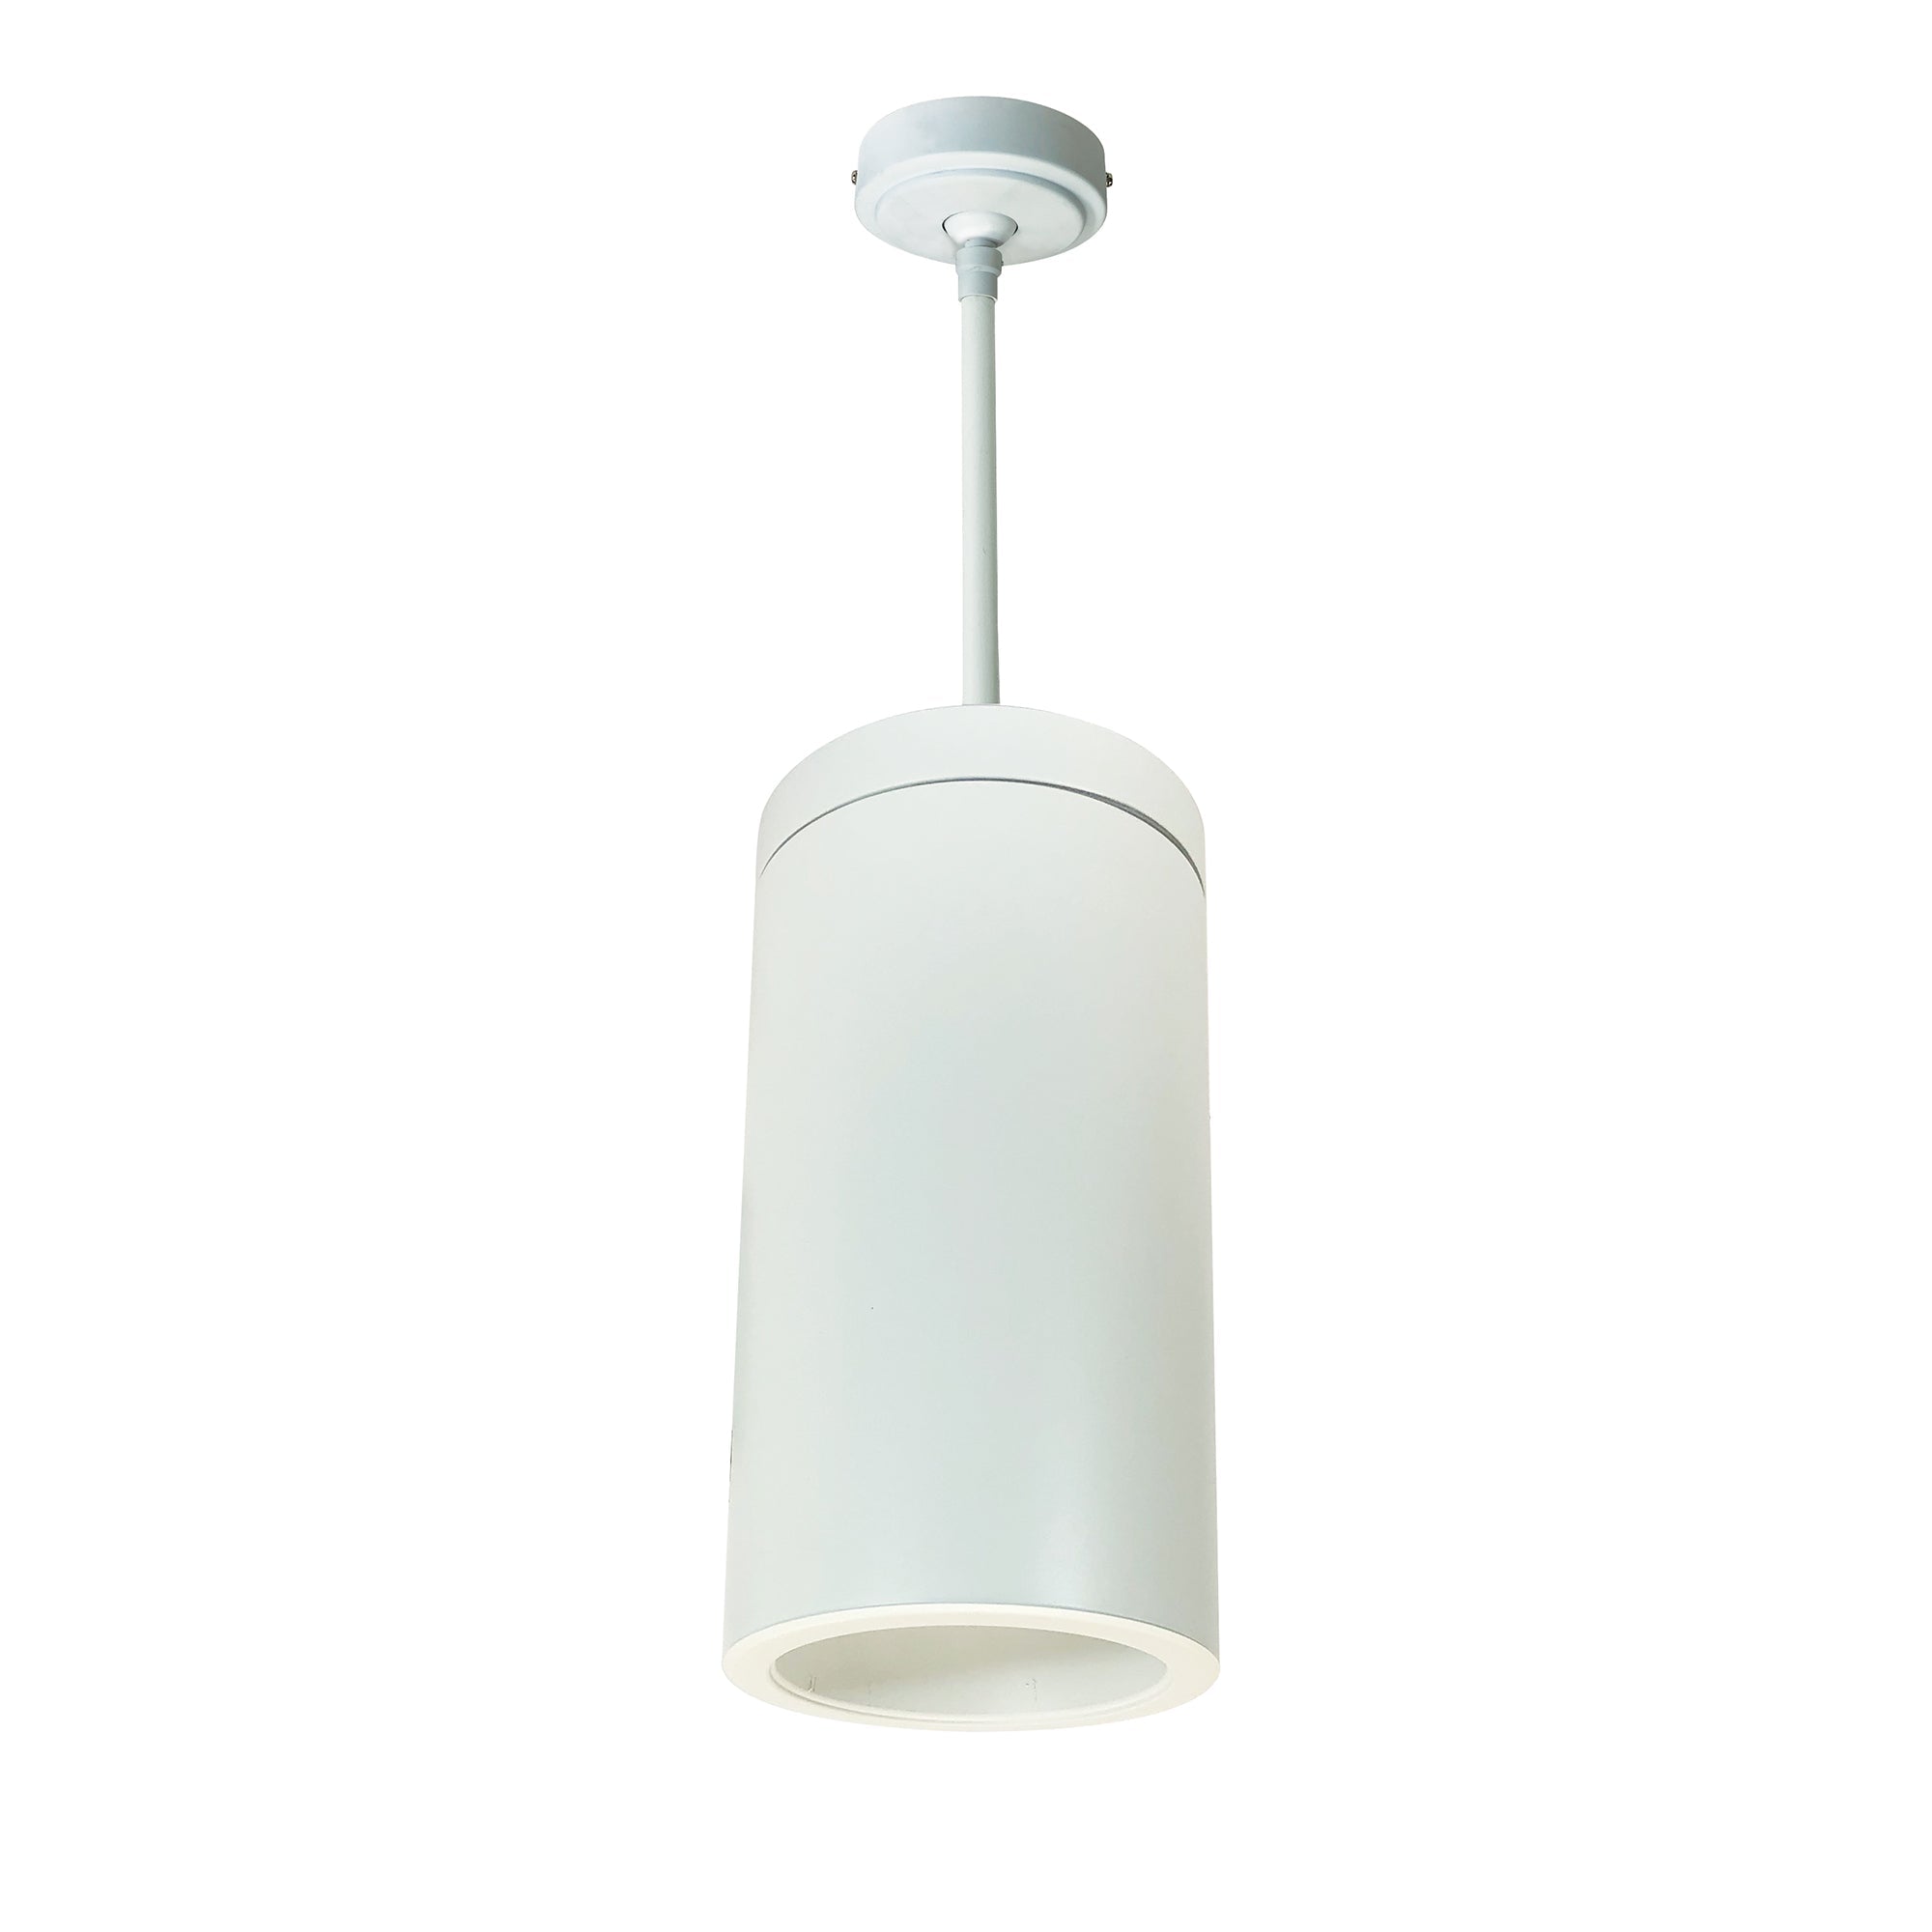 Nora Lighting LE45 - NYLS2-6P25130MWWW3